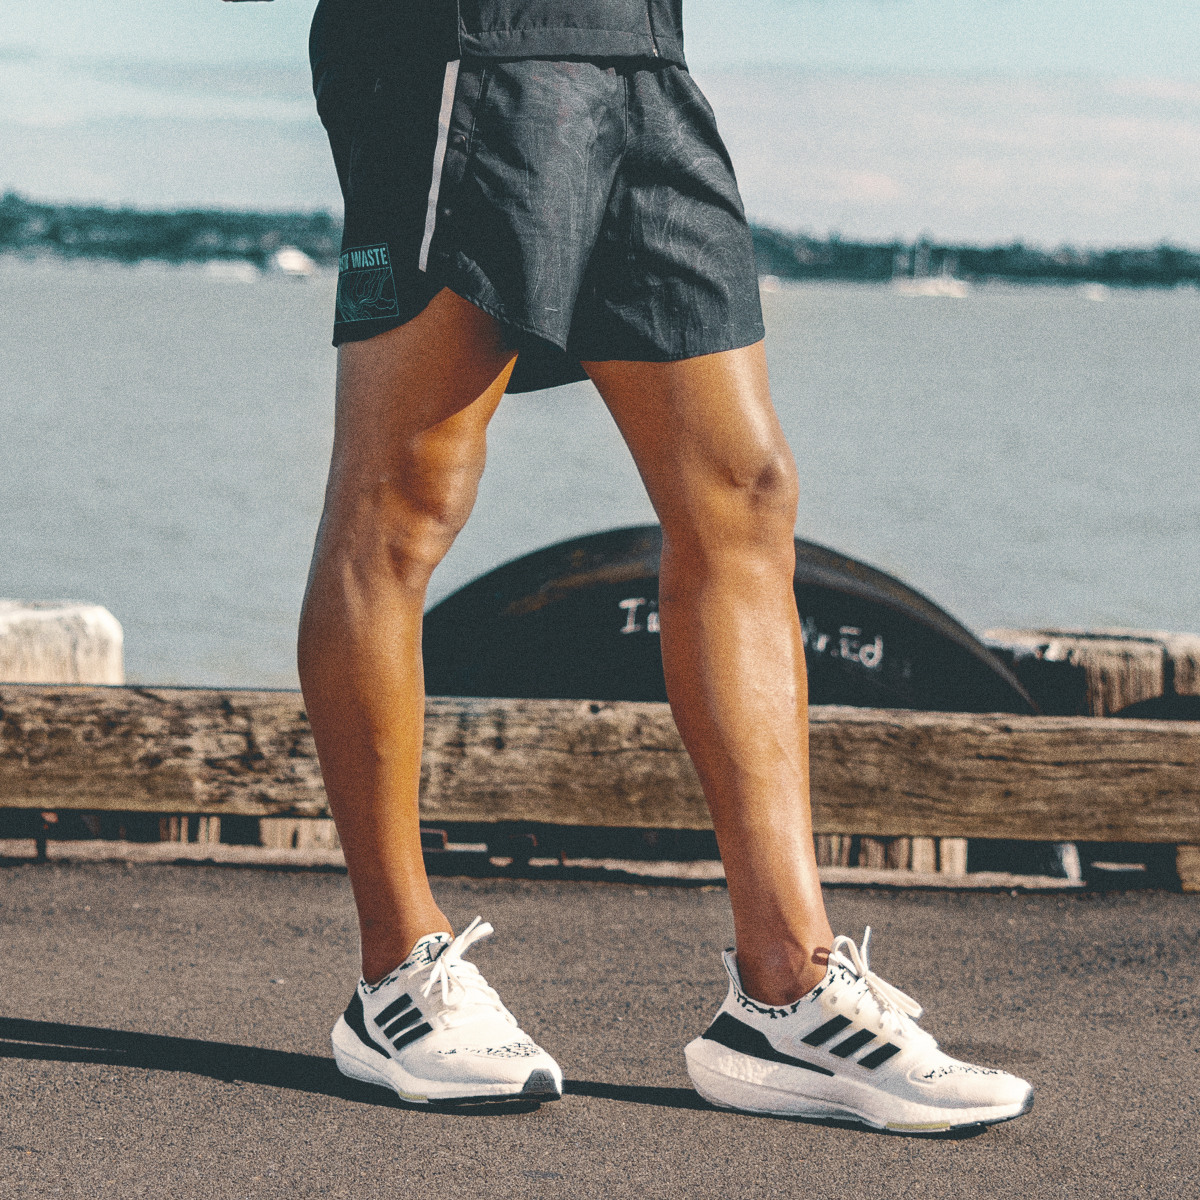 Adidas Shorts Designed for Running for the Oceans. 7